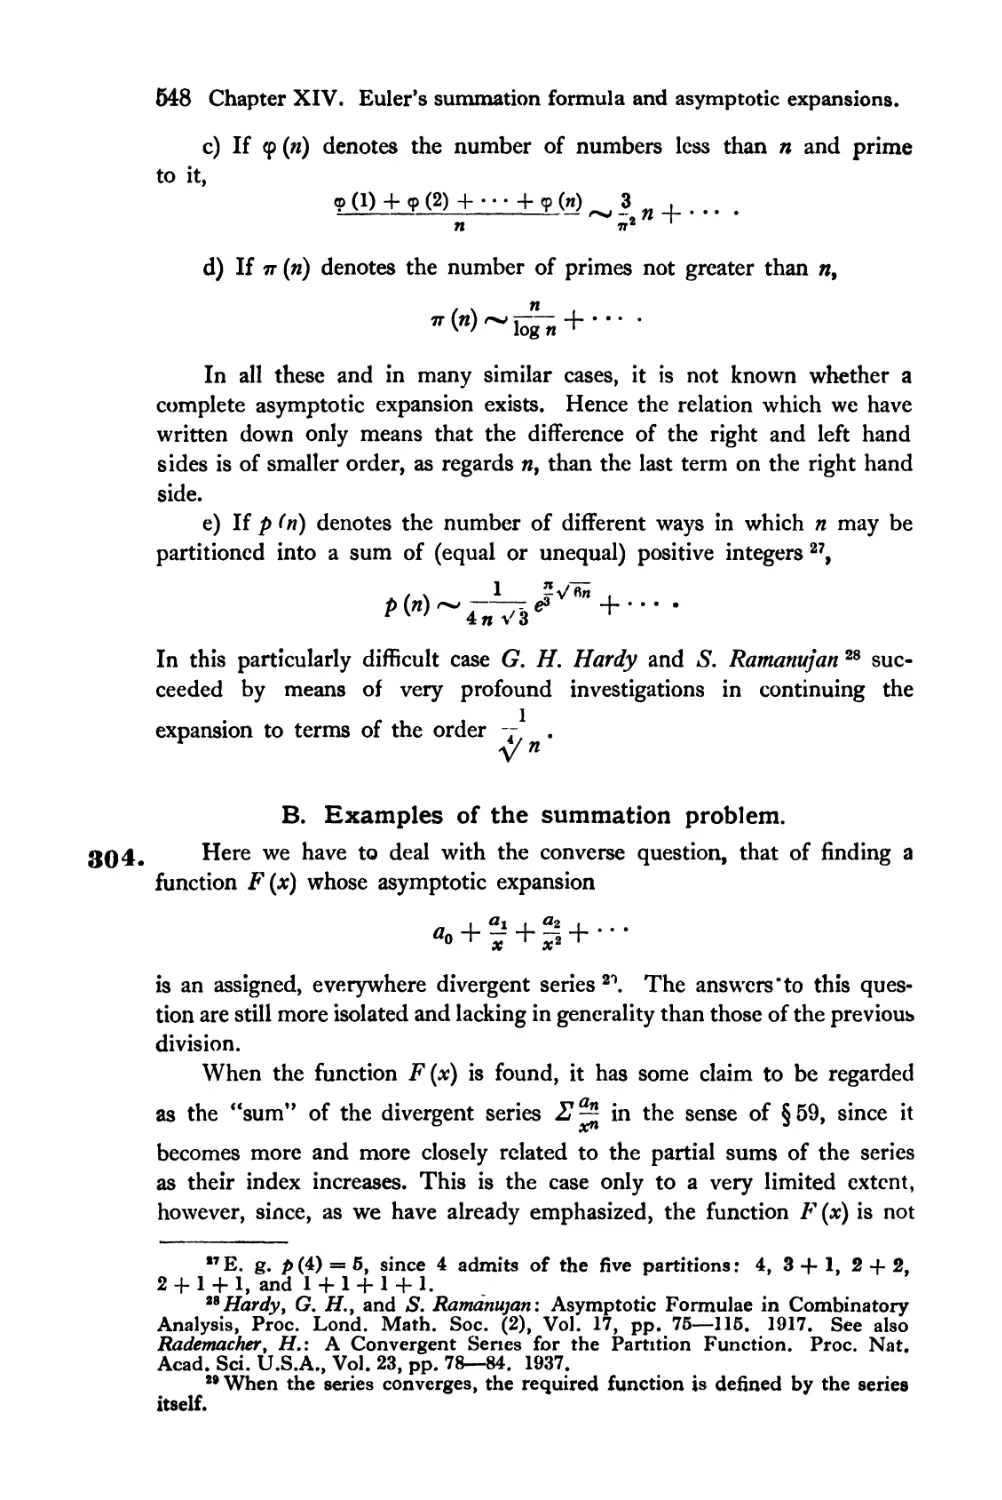 B. Examples of the summation problem